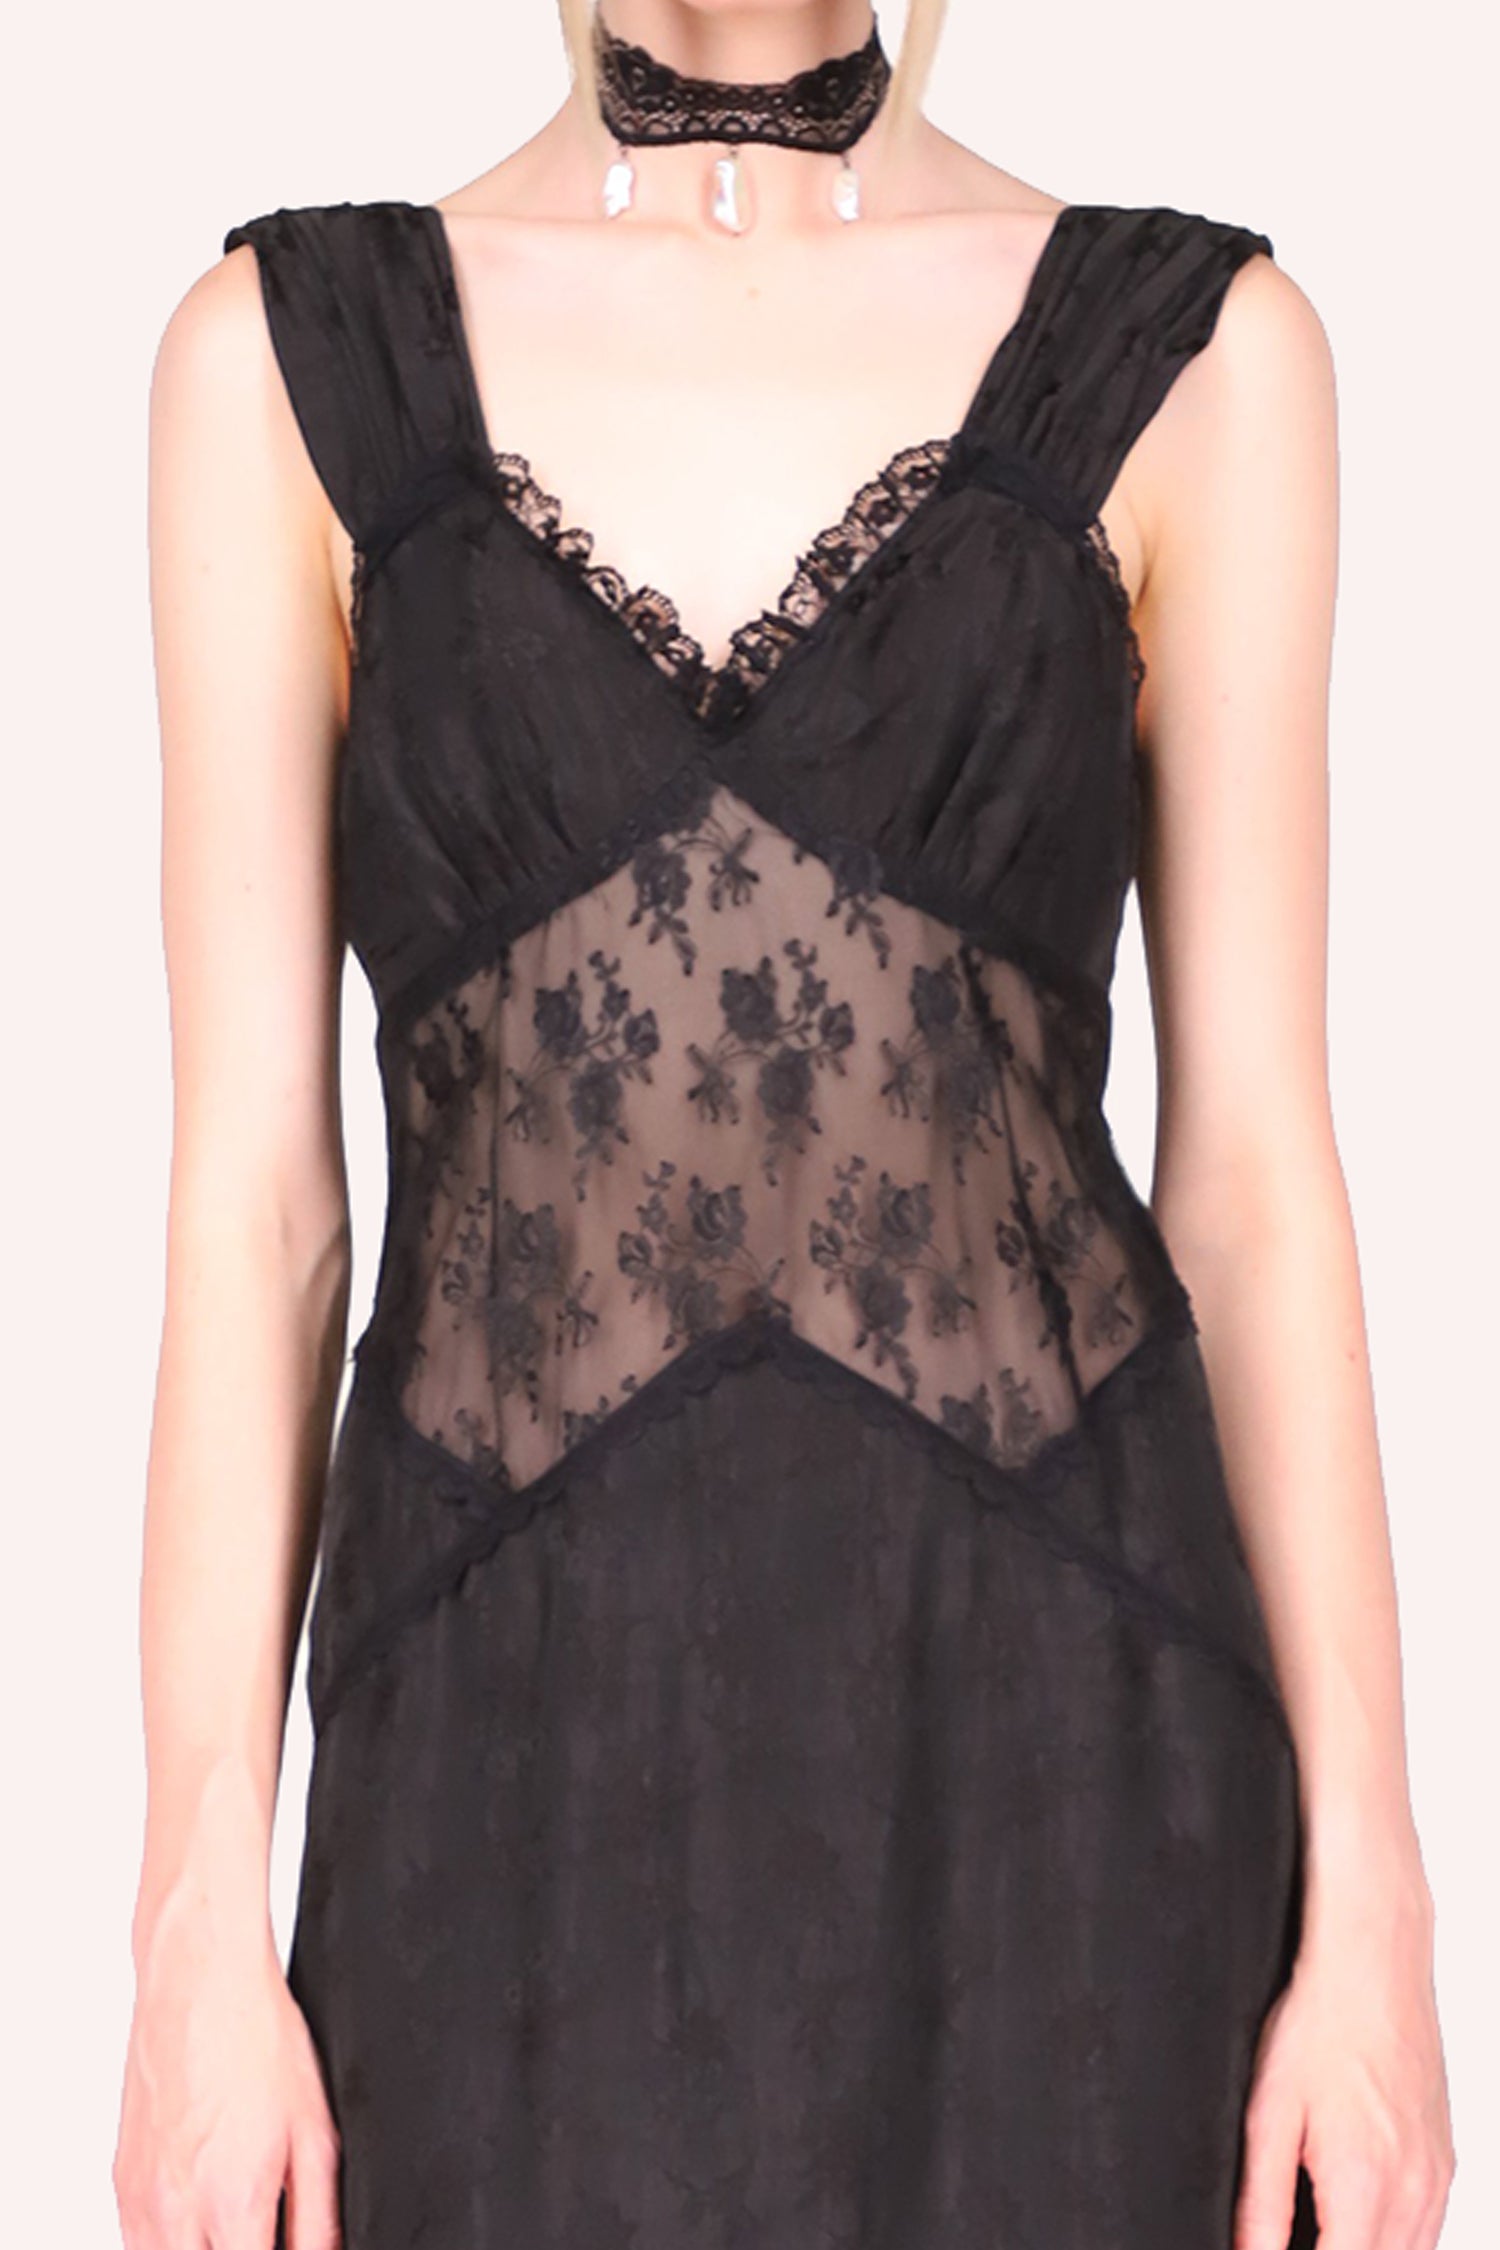 Floral Jacquard and Lace Dress black,  Detail of the black lace in front, with floral design and the triangle shapes 